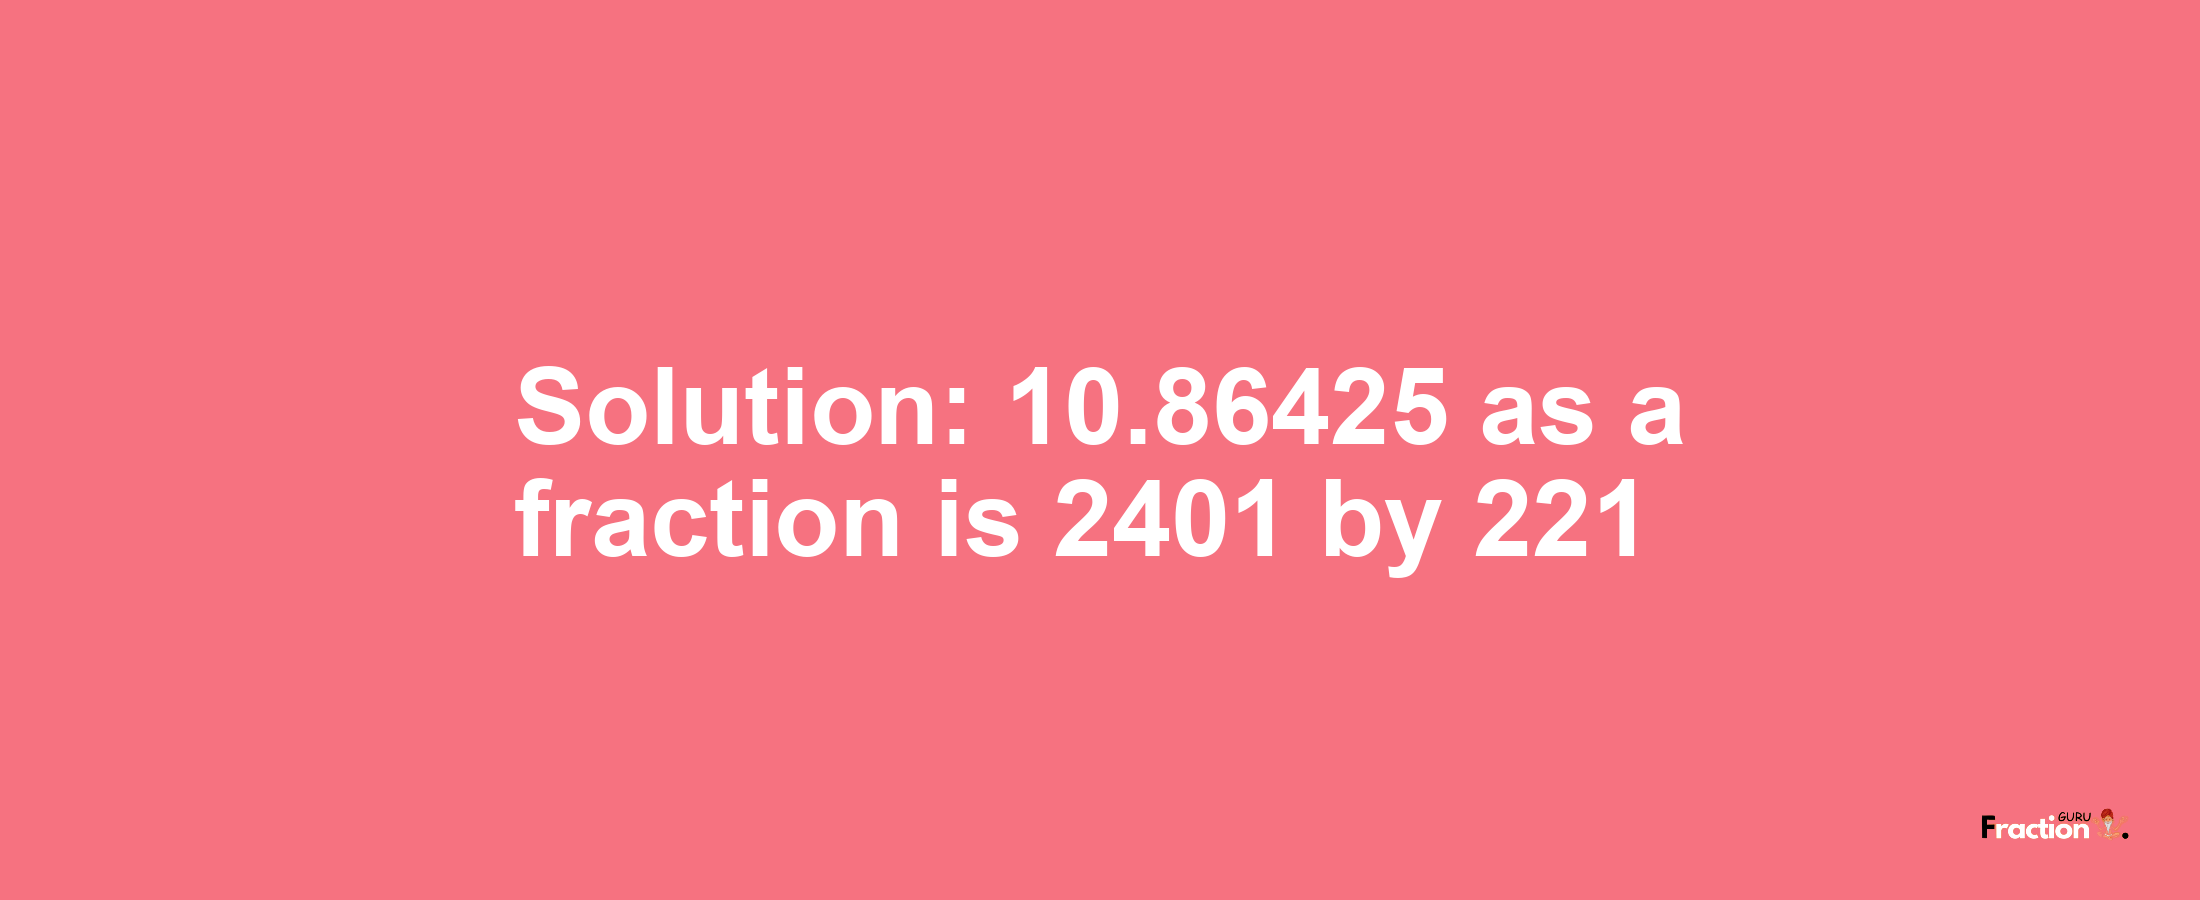 Solution:10.86425 as a fraction is 2401/221